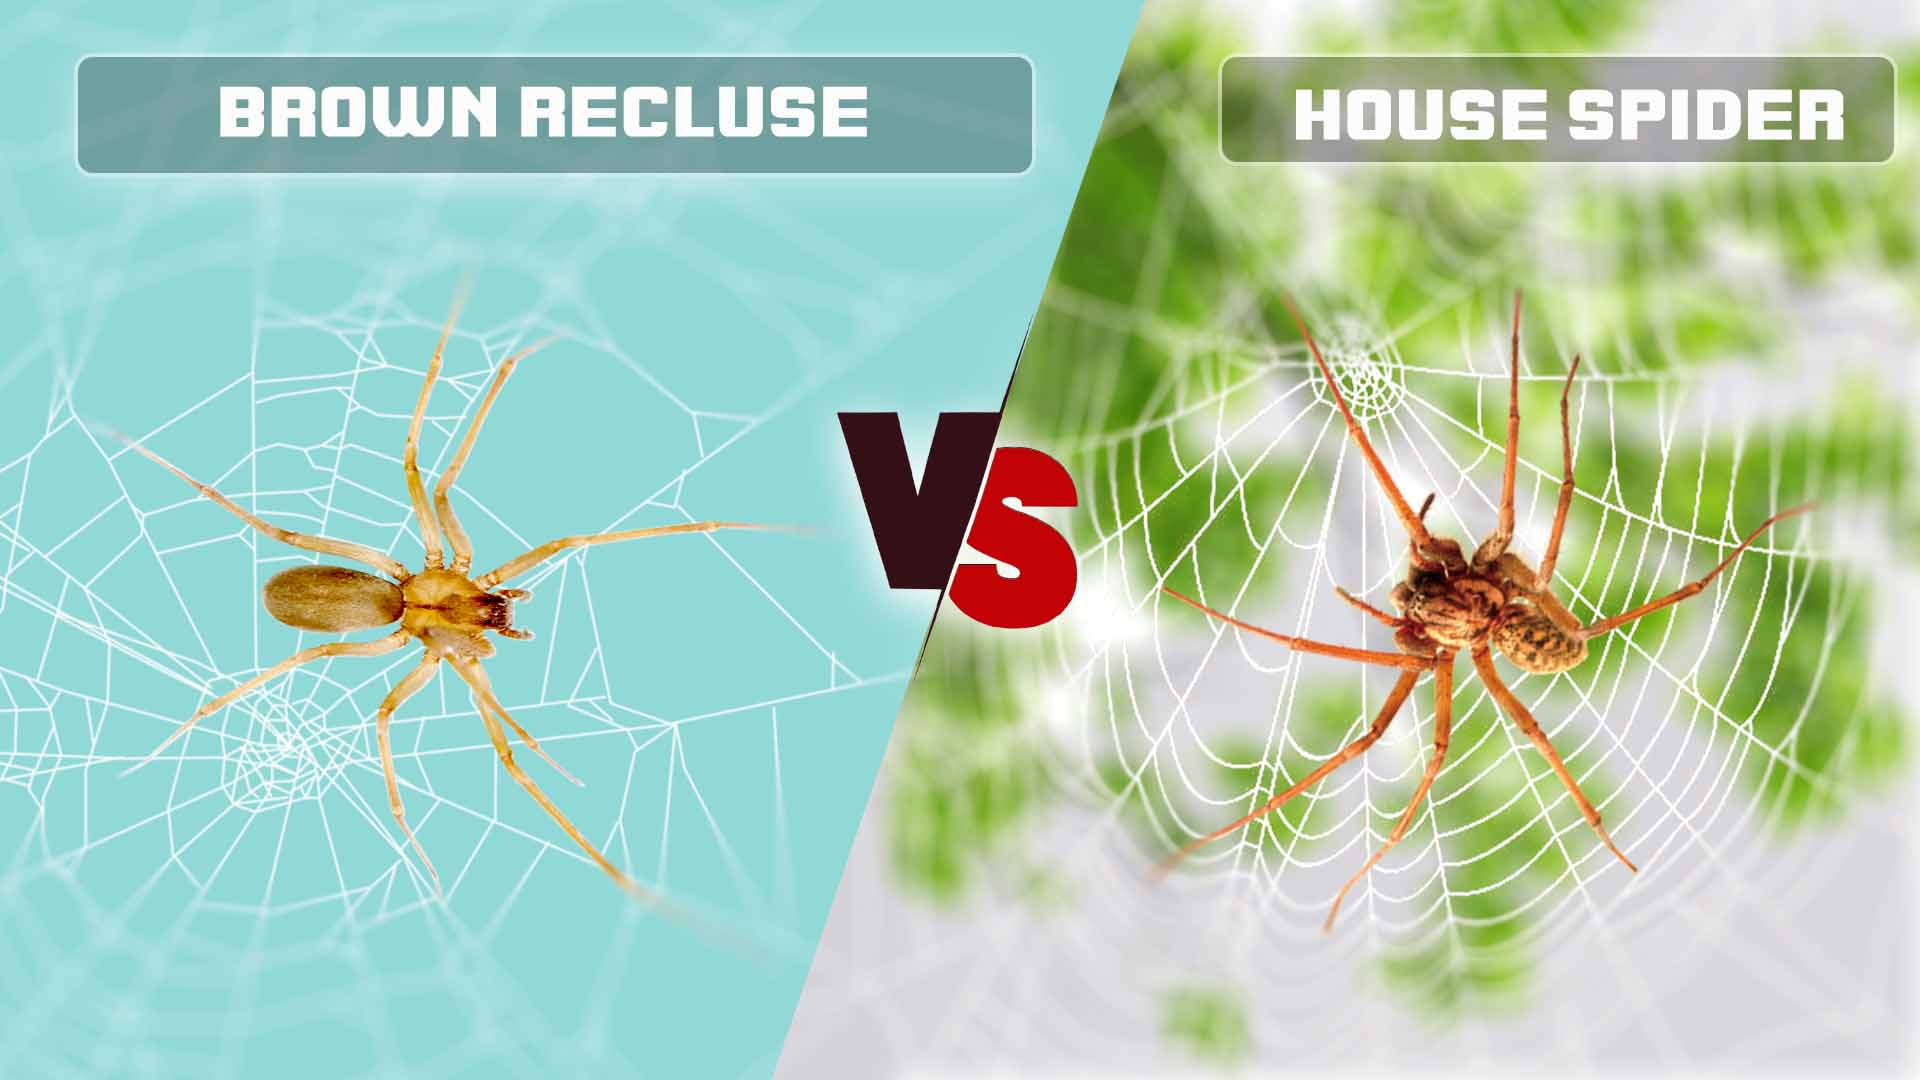 Brown Recluse Vs House Spider: What Are Differences?